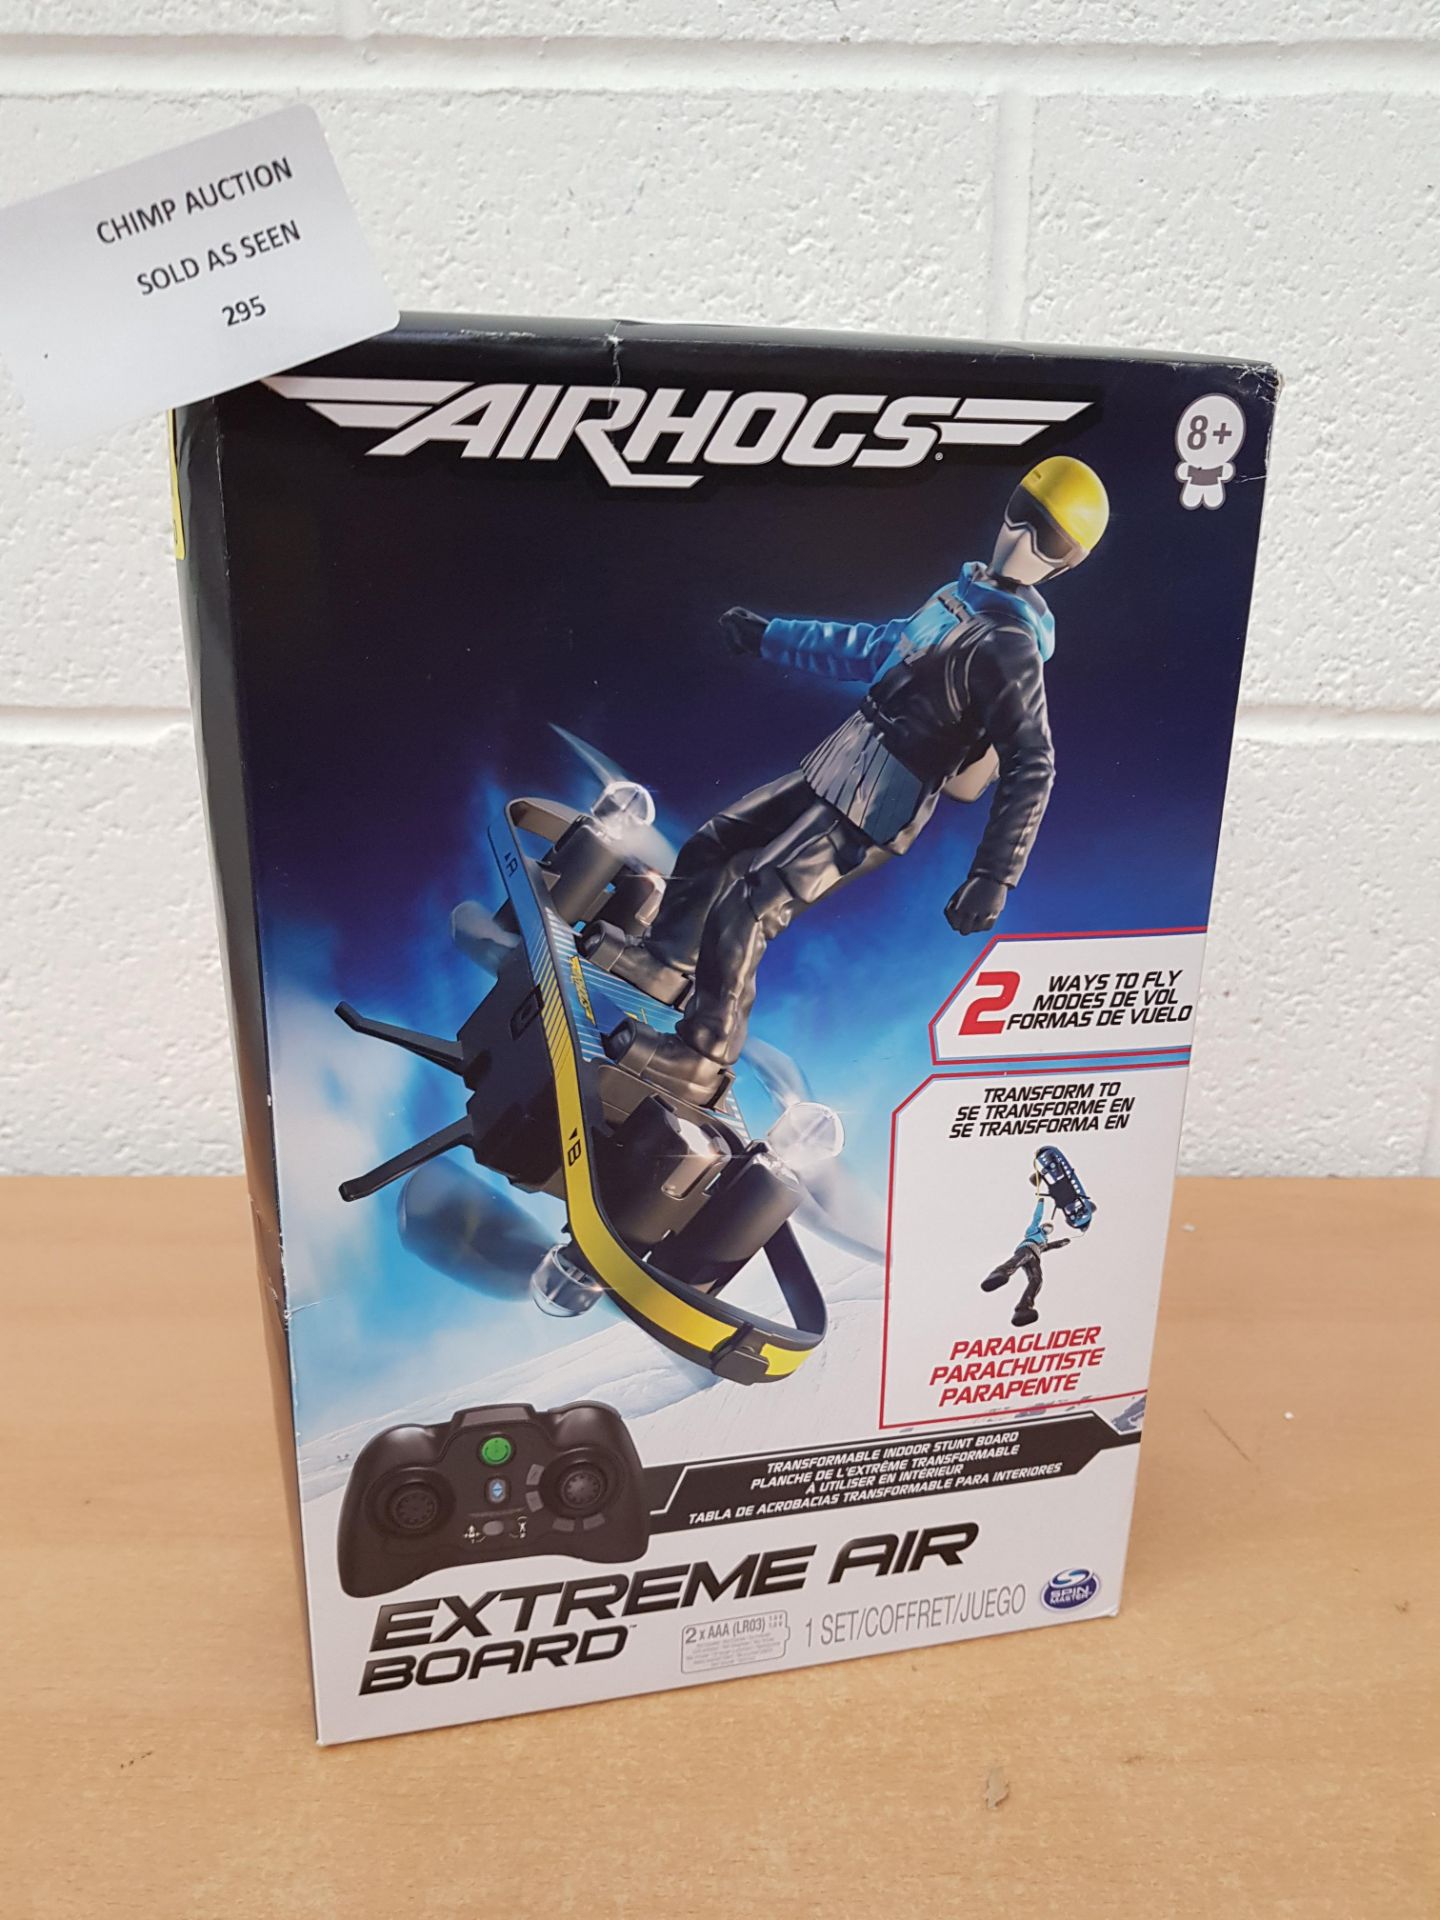 AirHogs Extreme Air Remote controlled Board